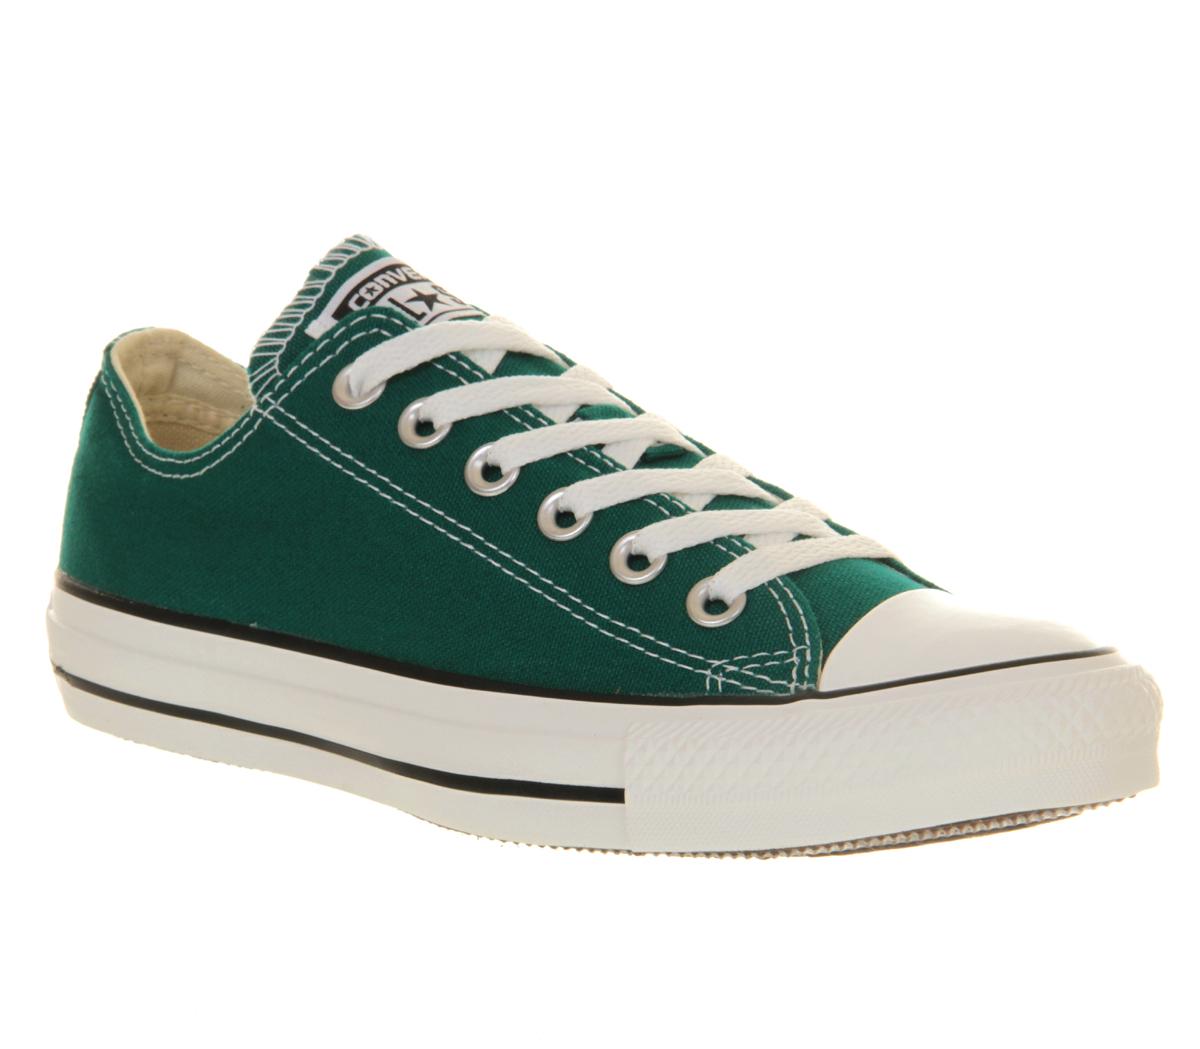 Converse Chuck Taylor All Star Seasonal Ox in Green for Men - Lyst